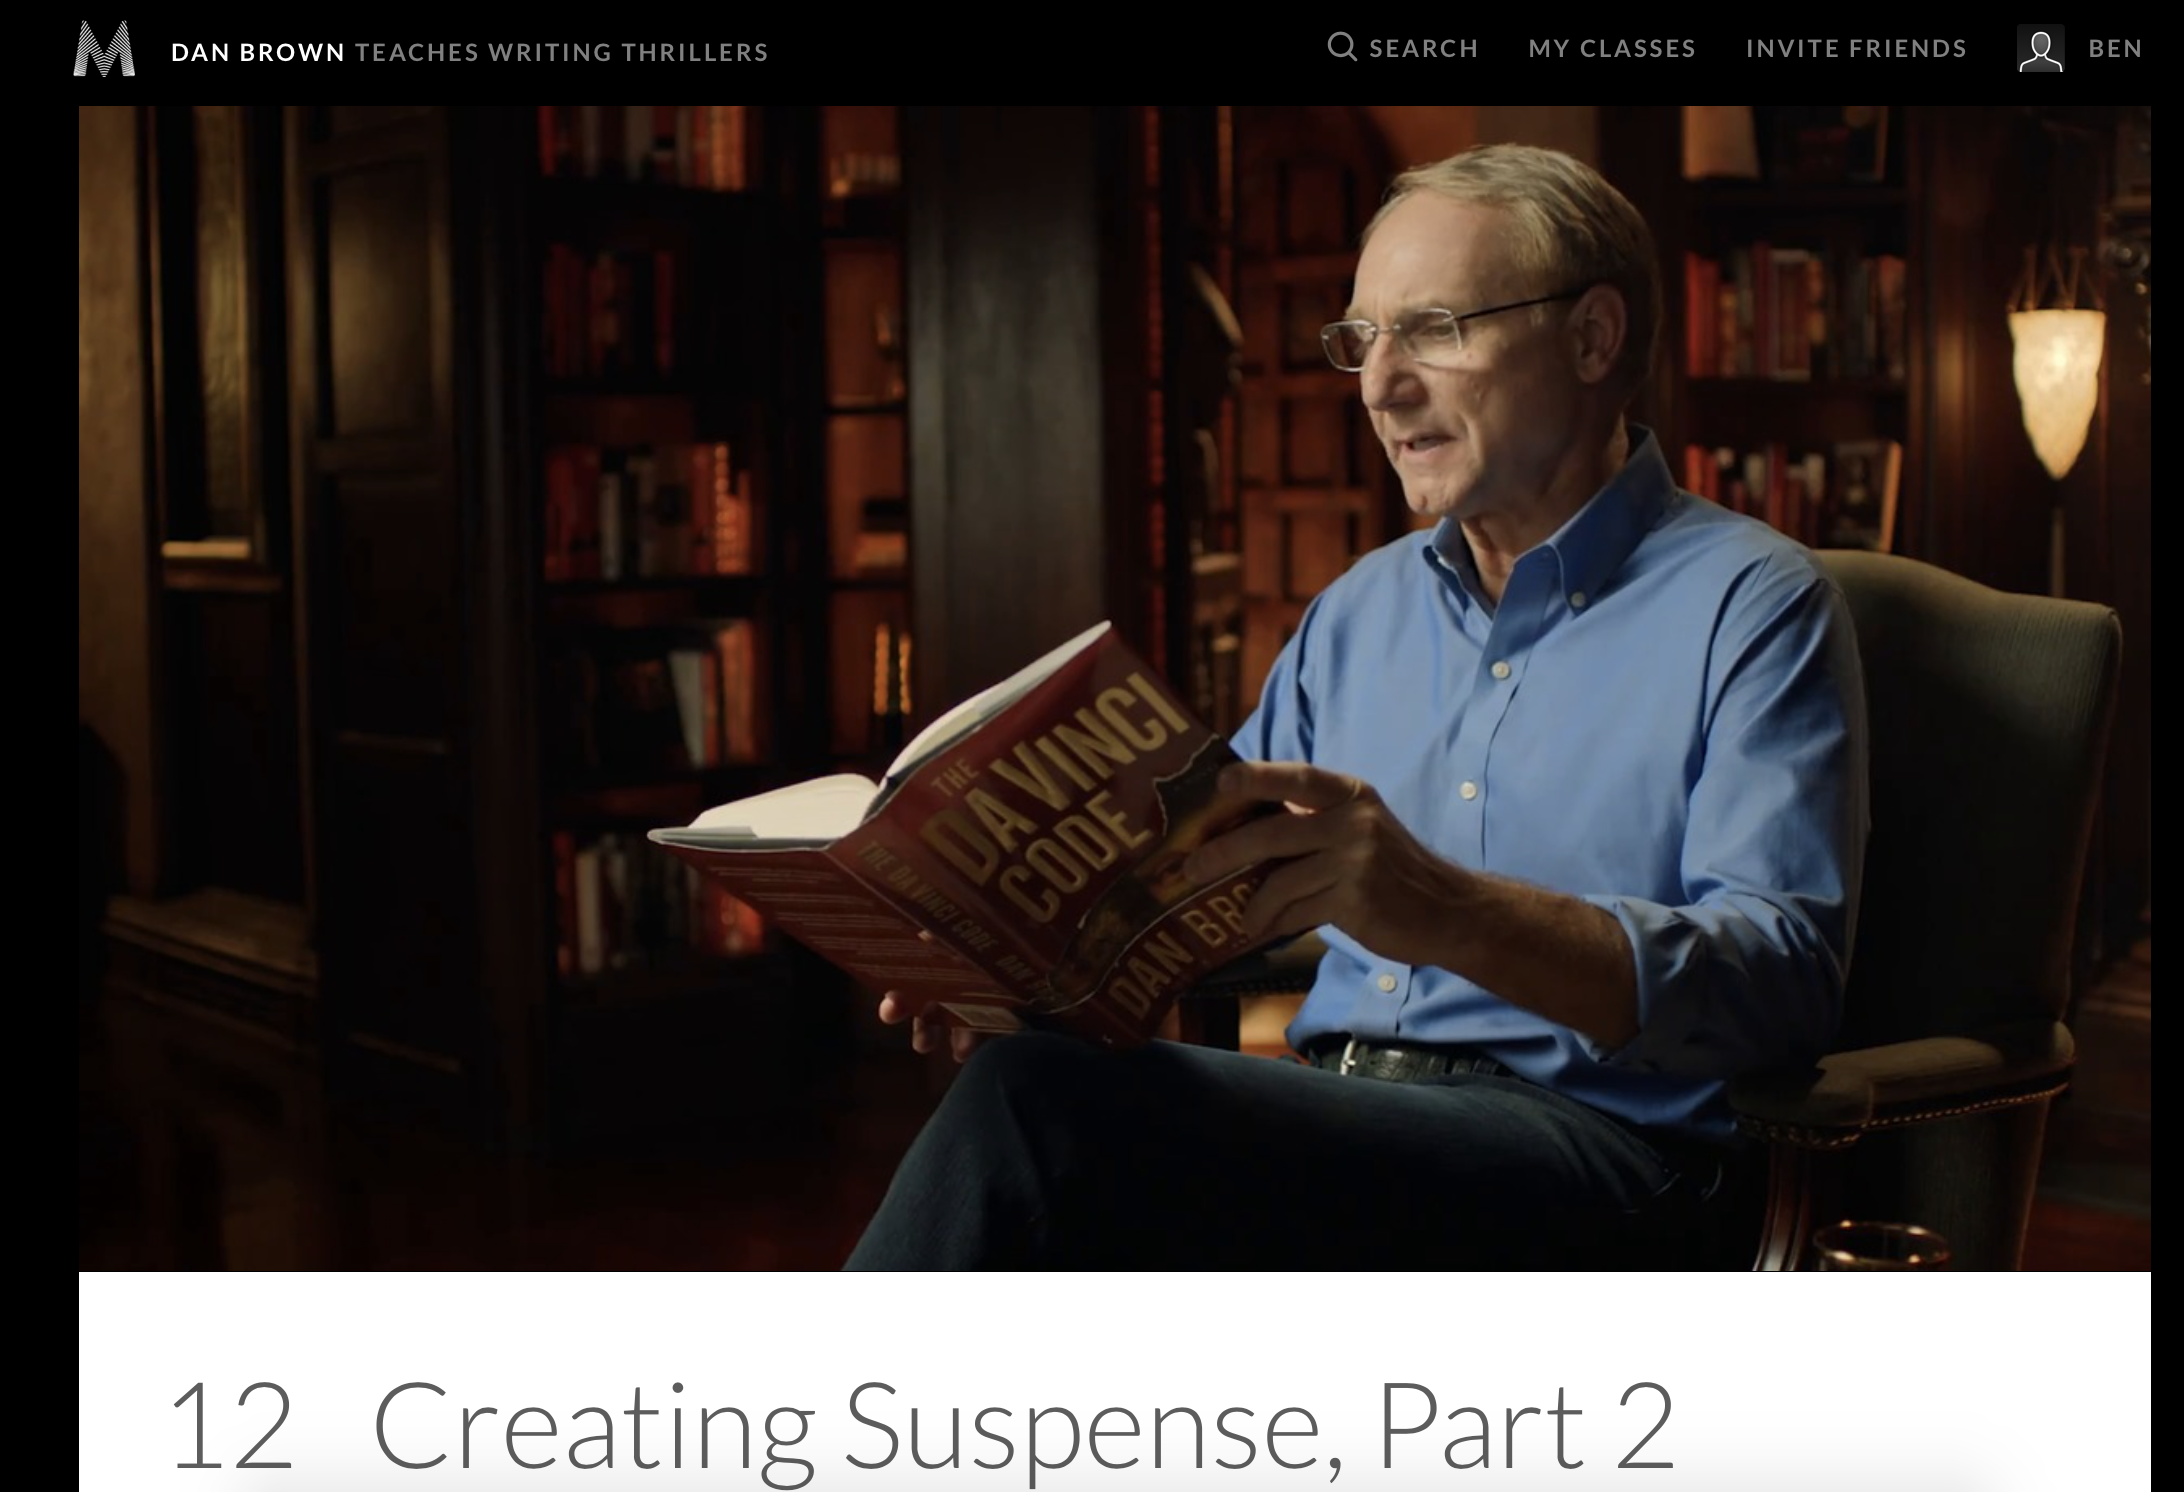 dan brown teaches writing thrillers masterclass review